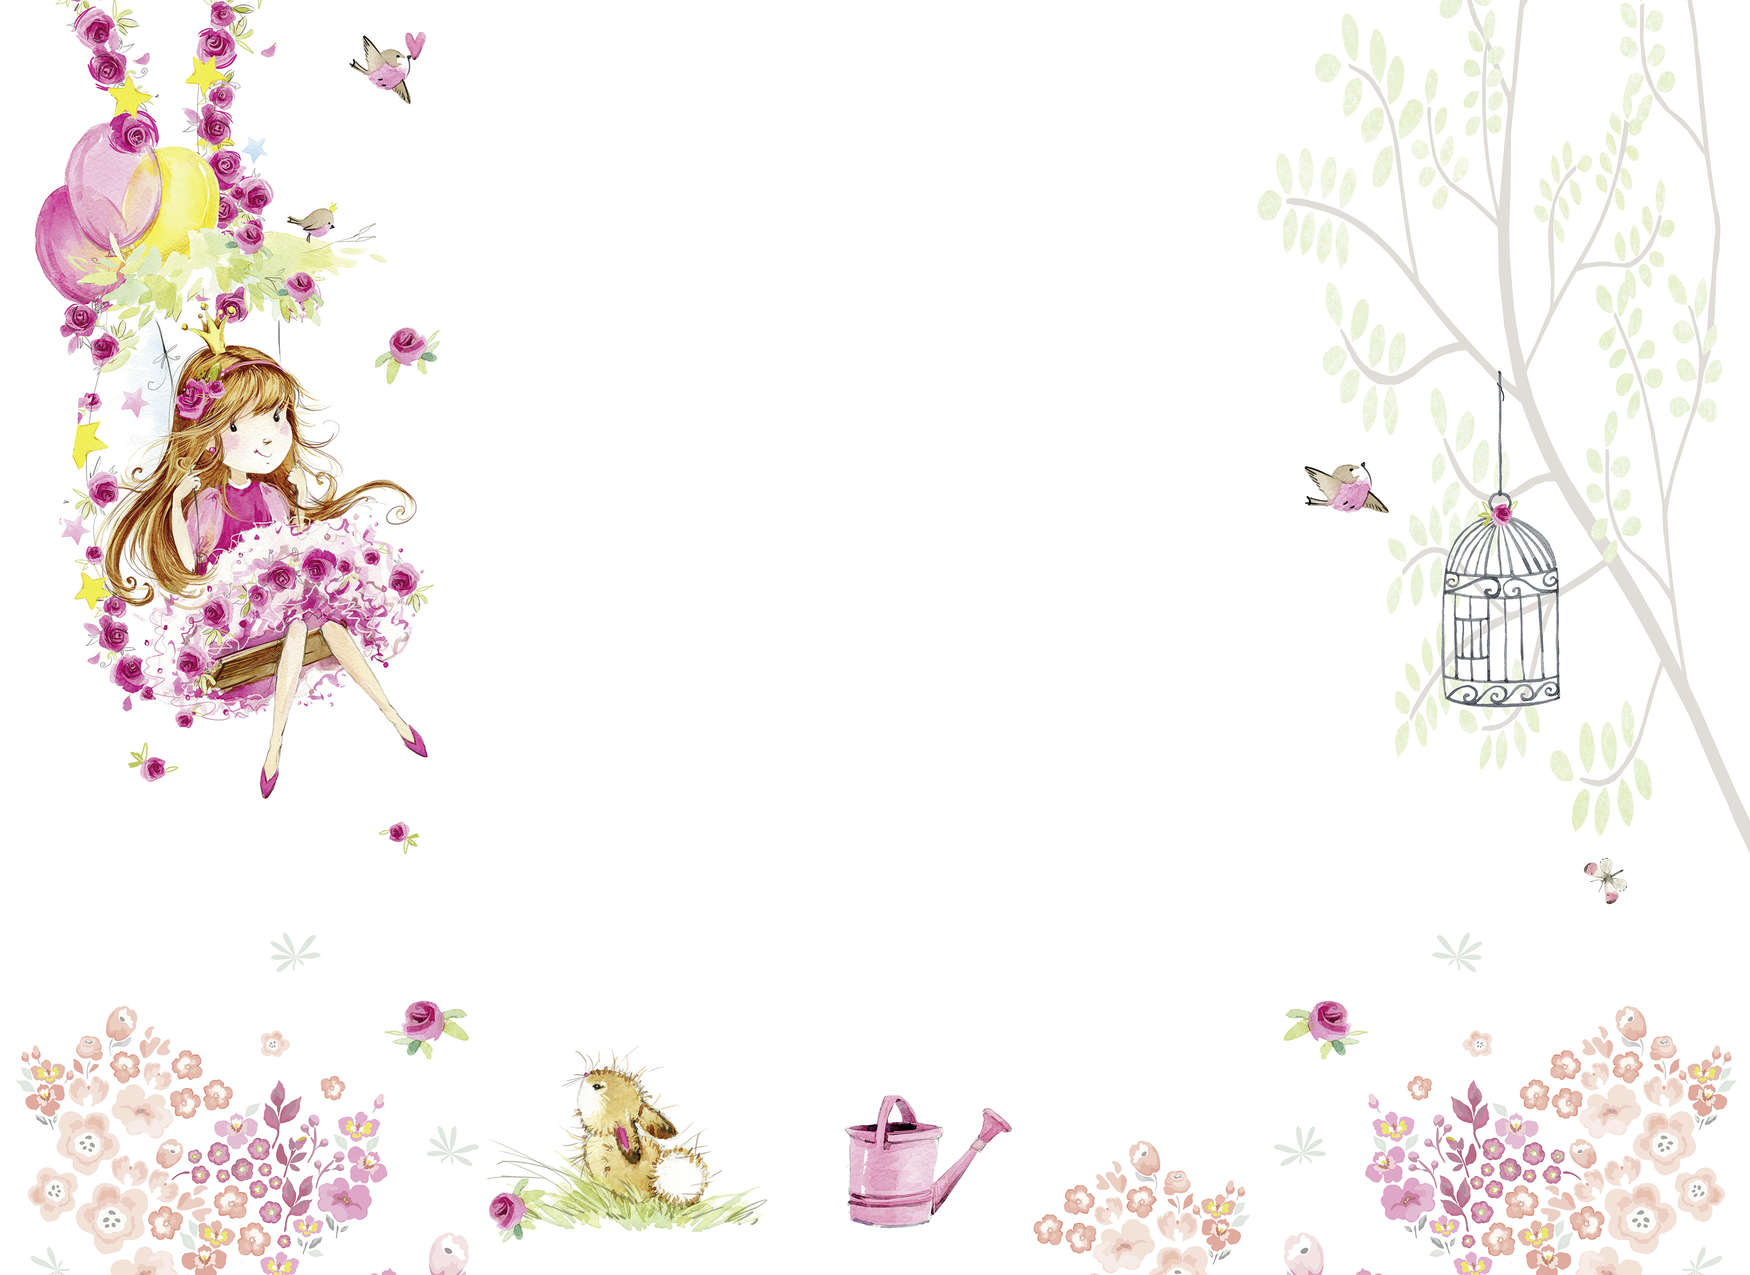             Nursery mural with princess on swing and animals - pink, white, green
        